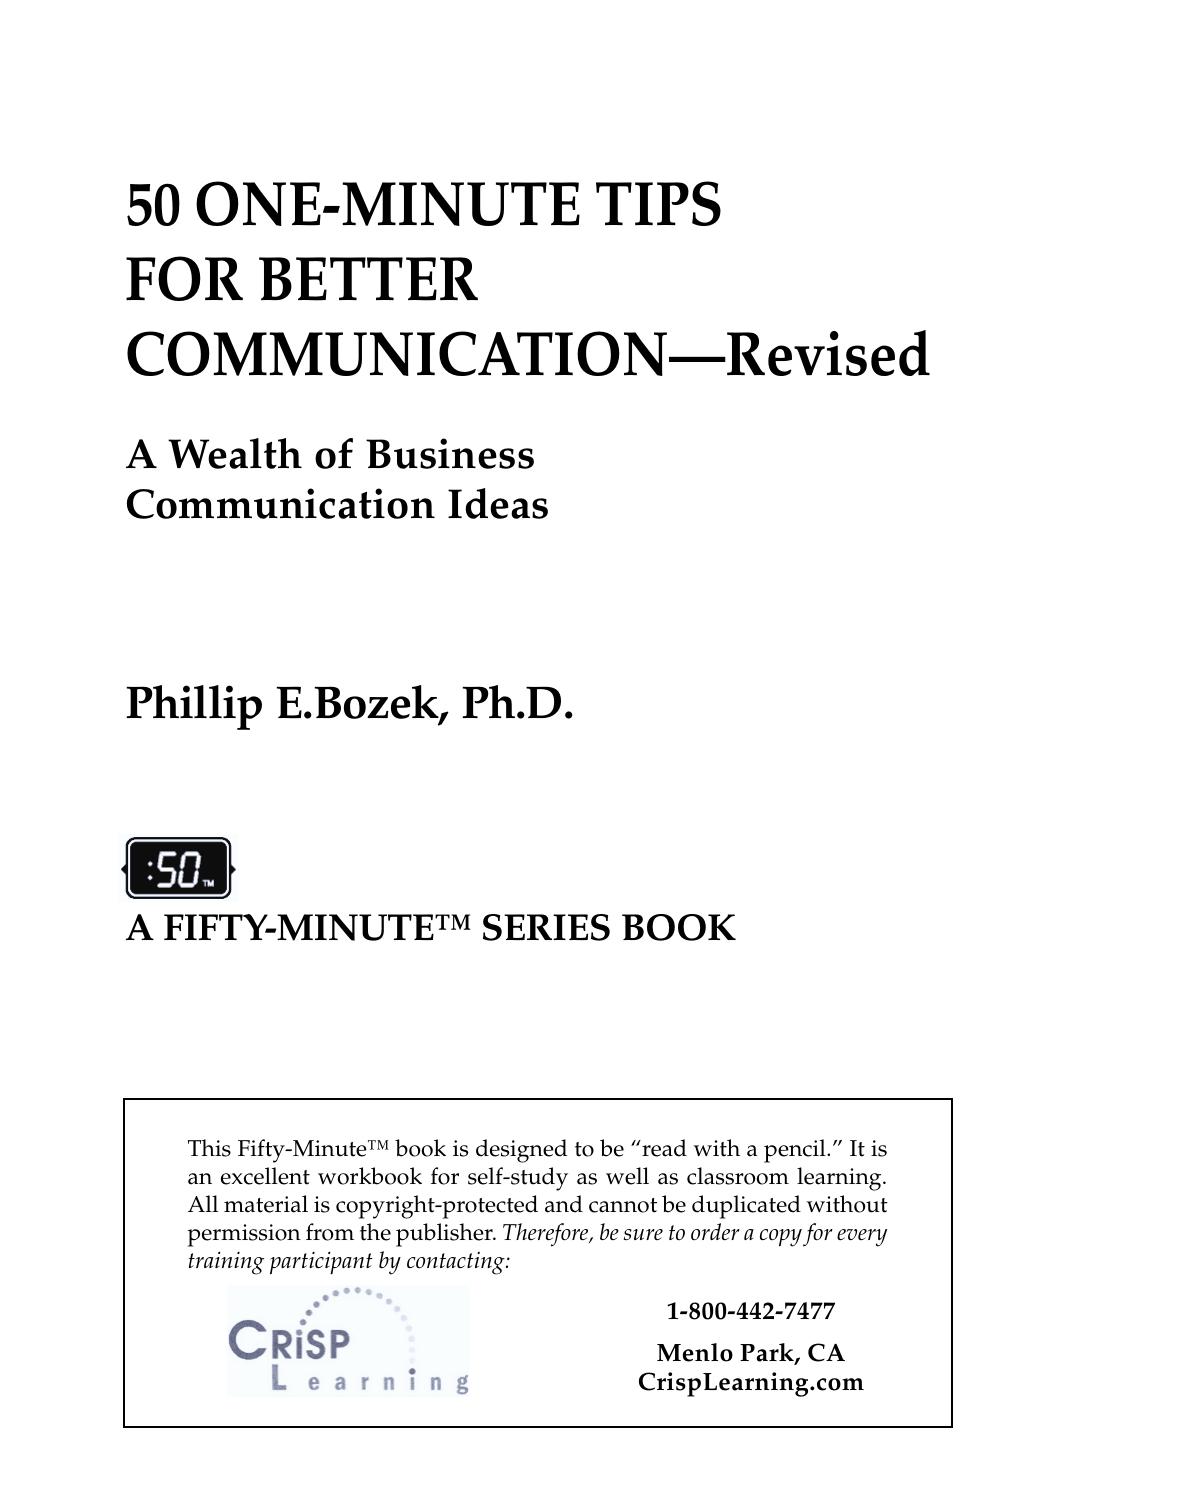 50 One-Minute Tips to Better Communication : A Wealth of Business Communication Ideas by Phillip E. Bozek